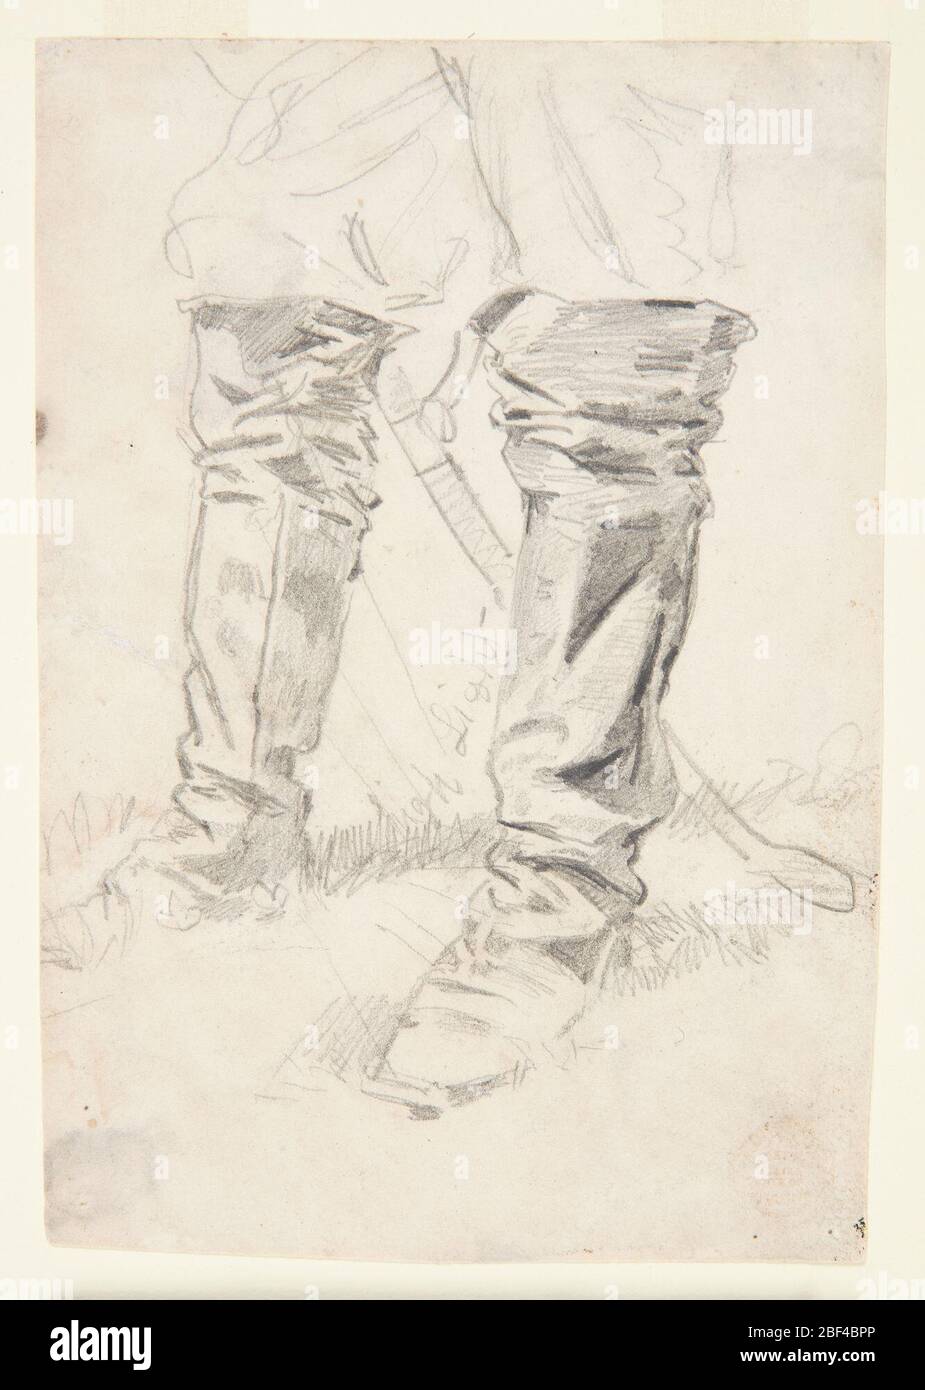 Study of Cavalry Officers Boots. Recto: Vertical view of the lower legs of man wearing knee-high boots and standing in grass; a sheathed sword hangs behind his legs; verso: foreshortened view of a man, with closed eyes, wearing a hat and lying on ground. Stock Photo